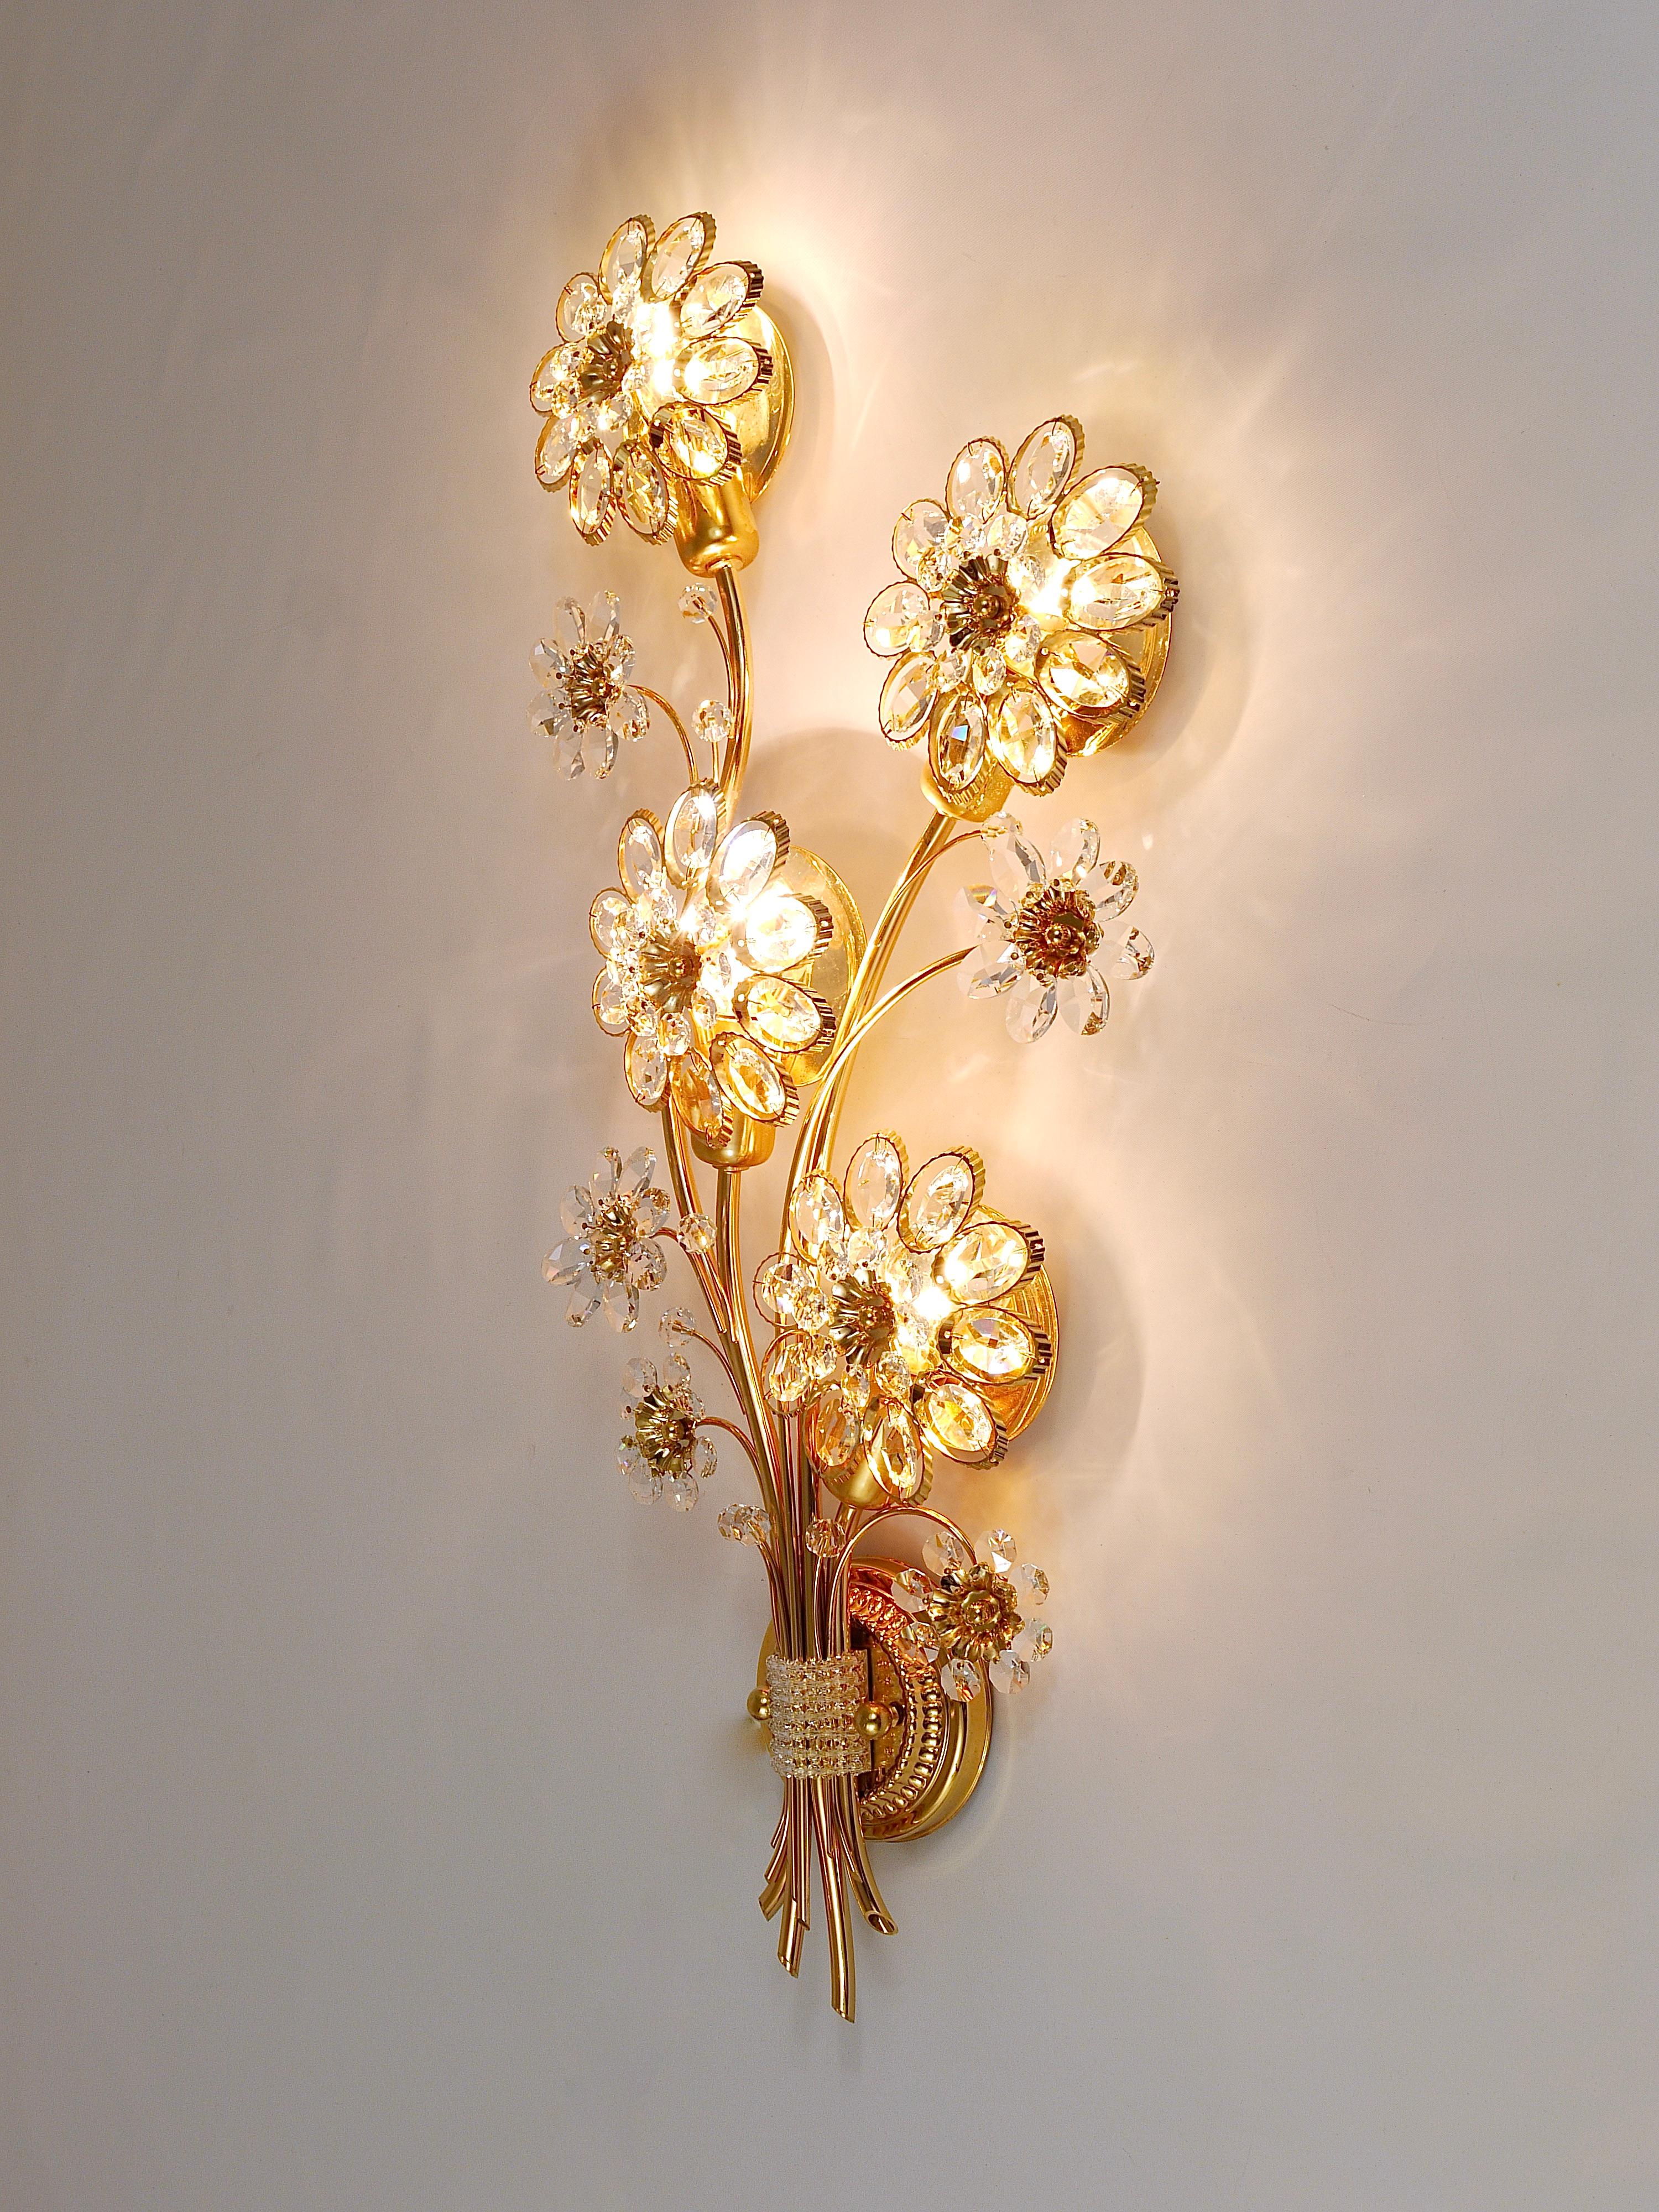 A beautiful and huge floral sconce, manufactured in the 1970s by Palwa, Germany. Made of gold-plated brass with faceted crystal glass petals. In excellent condition.